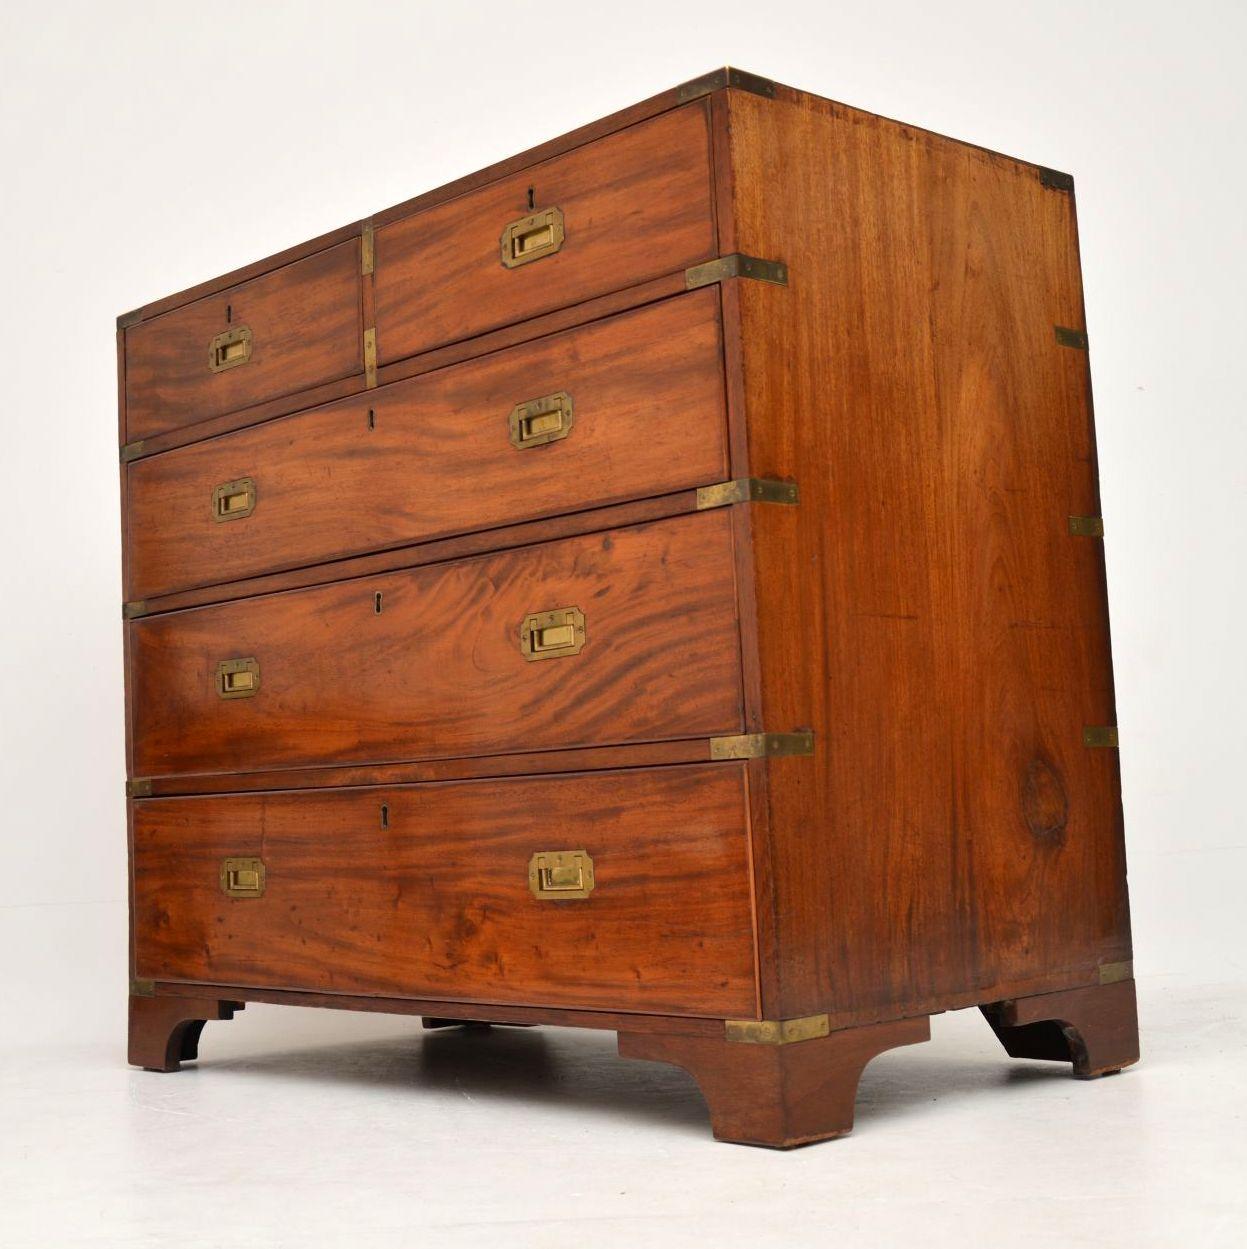 Early 19th century solid mahogany campaign chest of drawers in excellent original condition. The mahogany has some lovely patterned grains, a good patina, a warm original colour & loads of character. It has brass corner fittings & sunken military